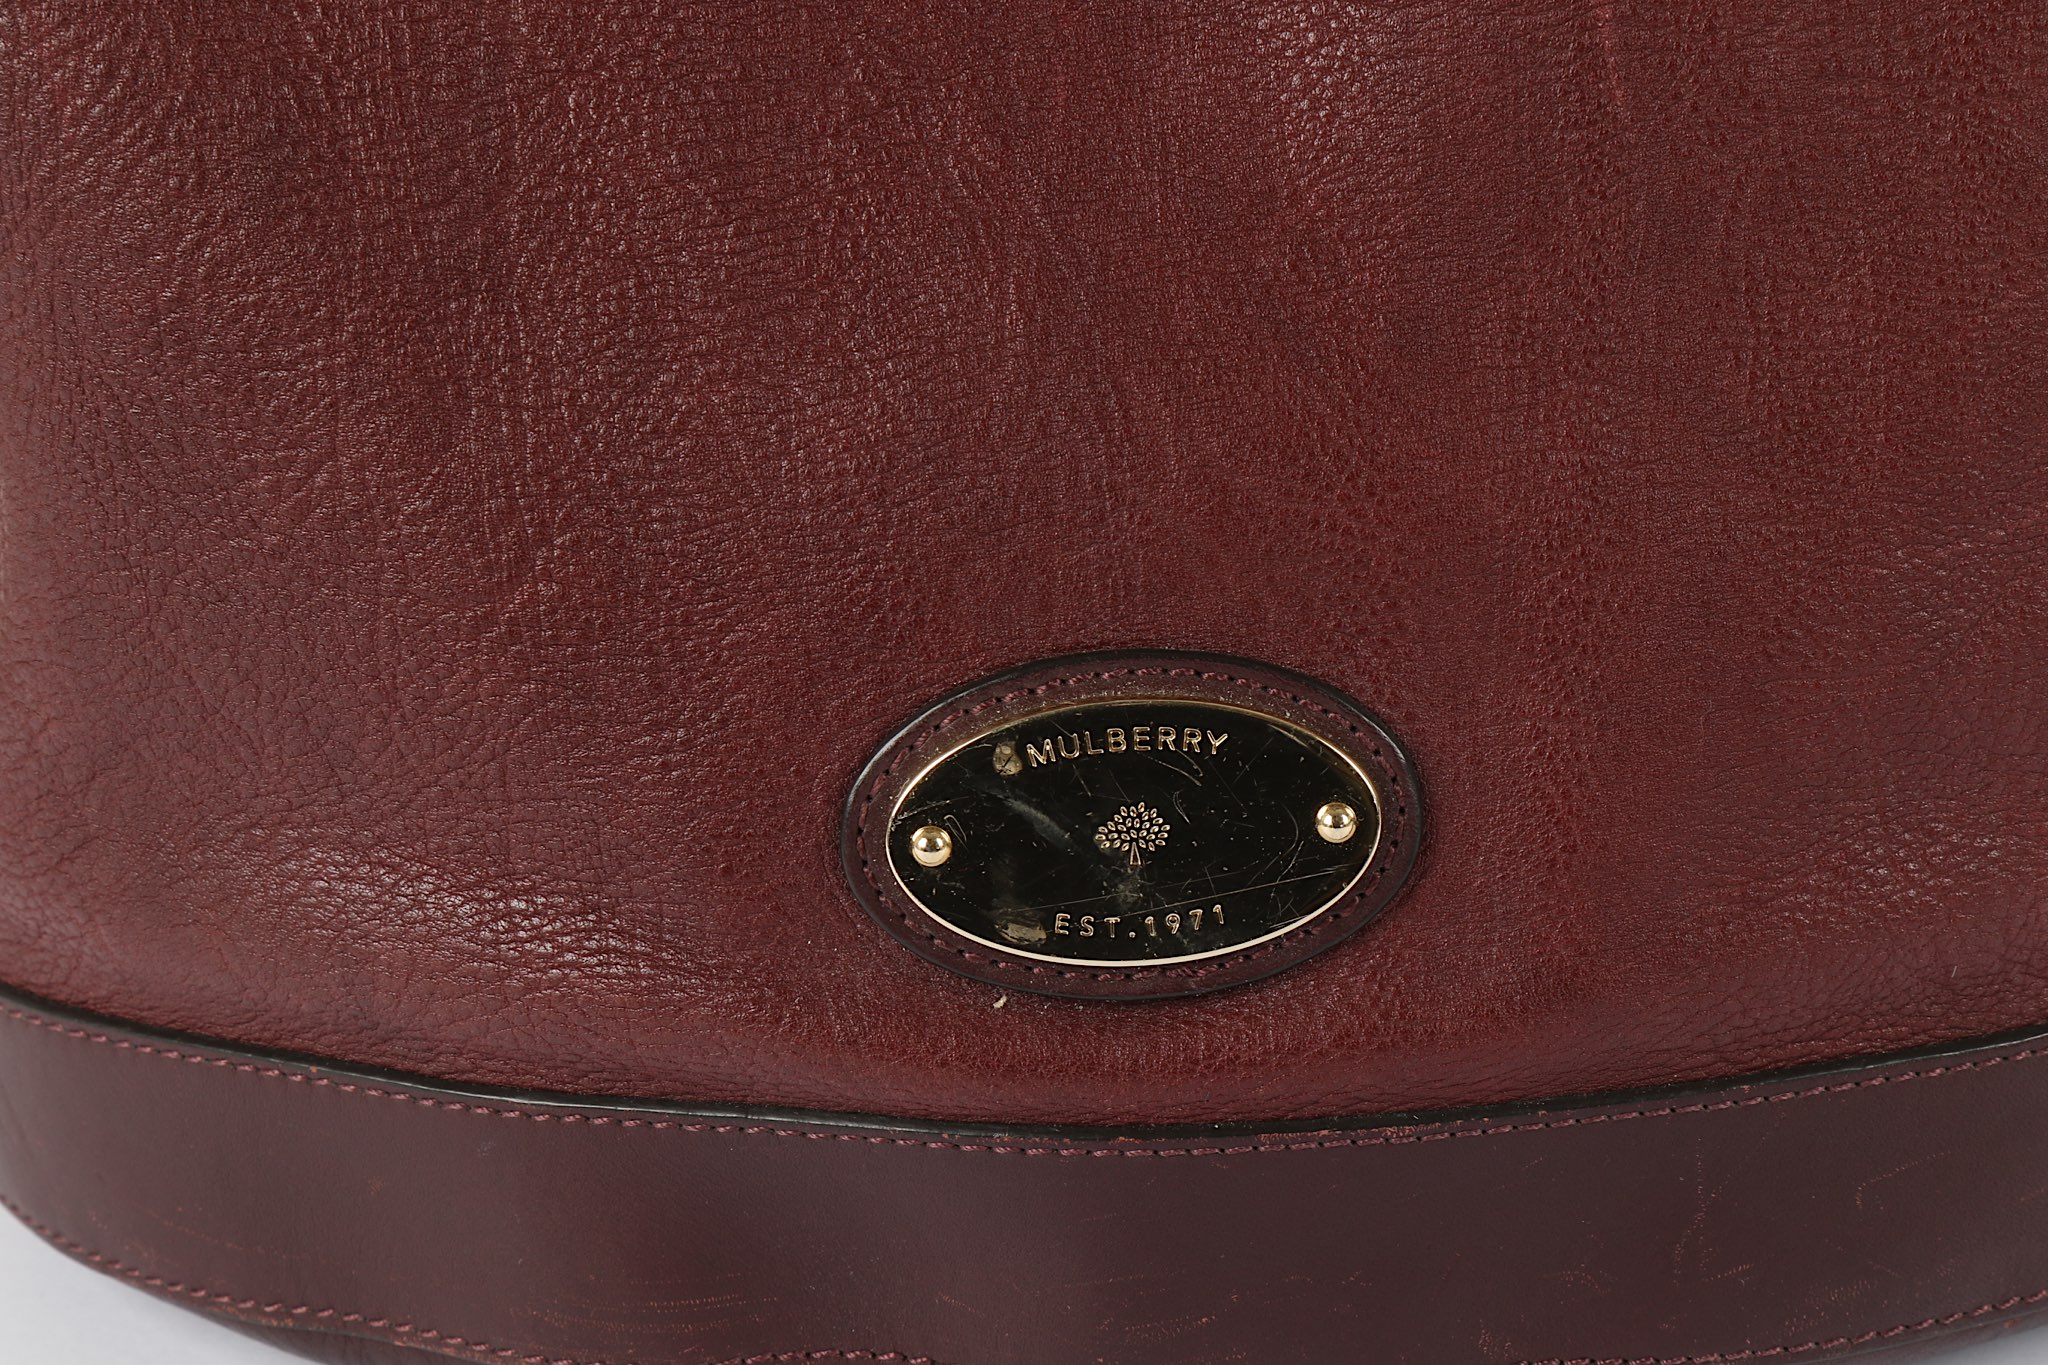 Mulberry Oxblood Jamie Bag, washed oxblood leather - Image 2 of 6